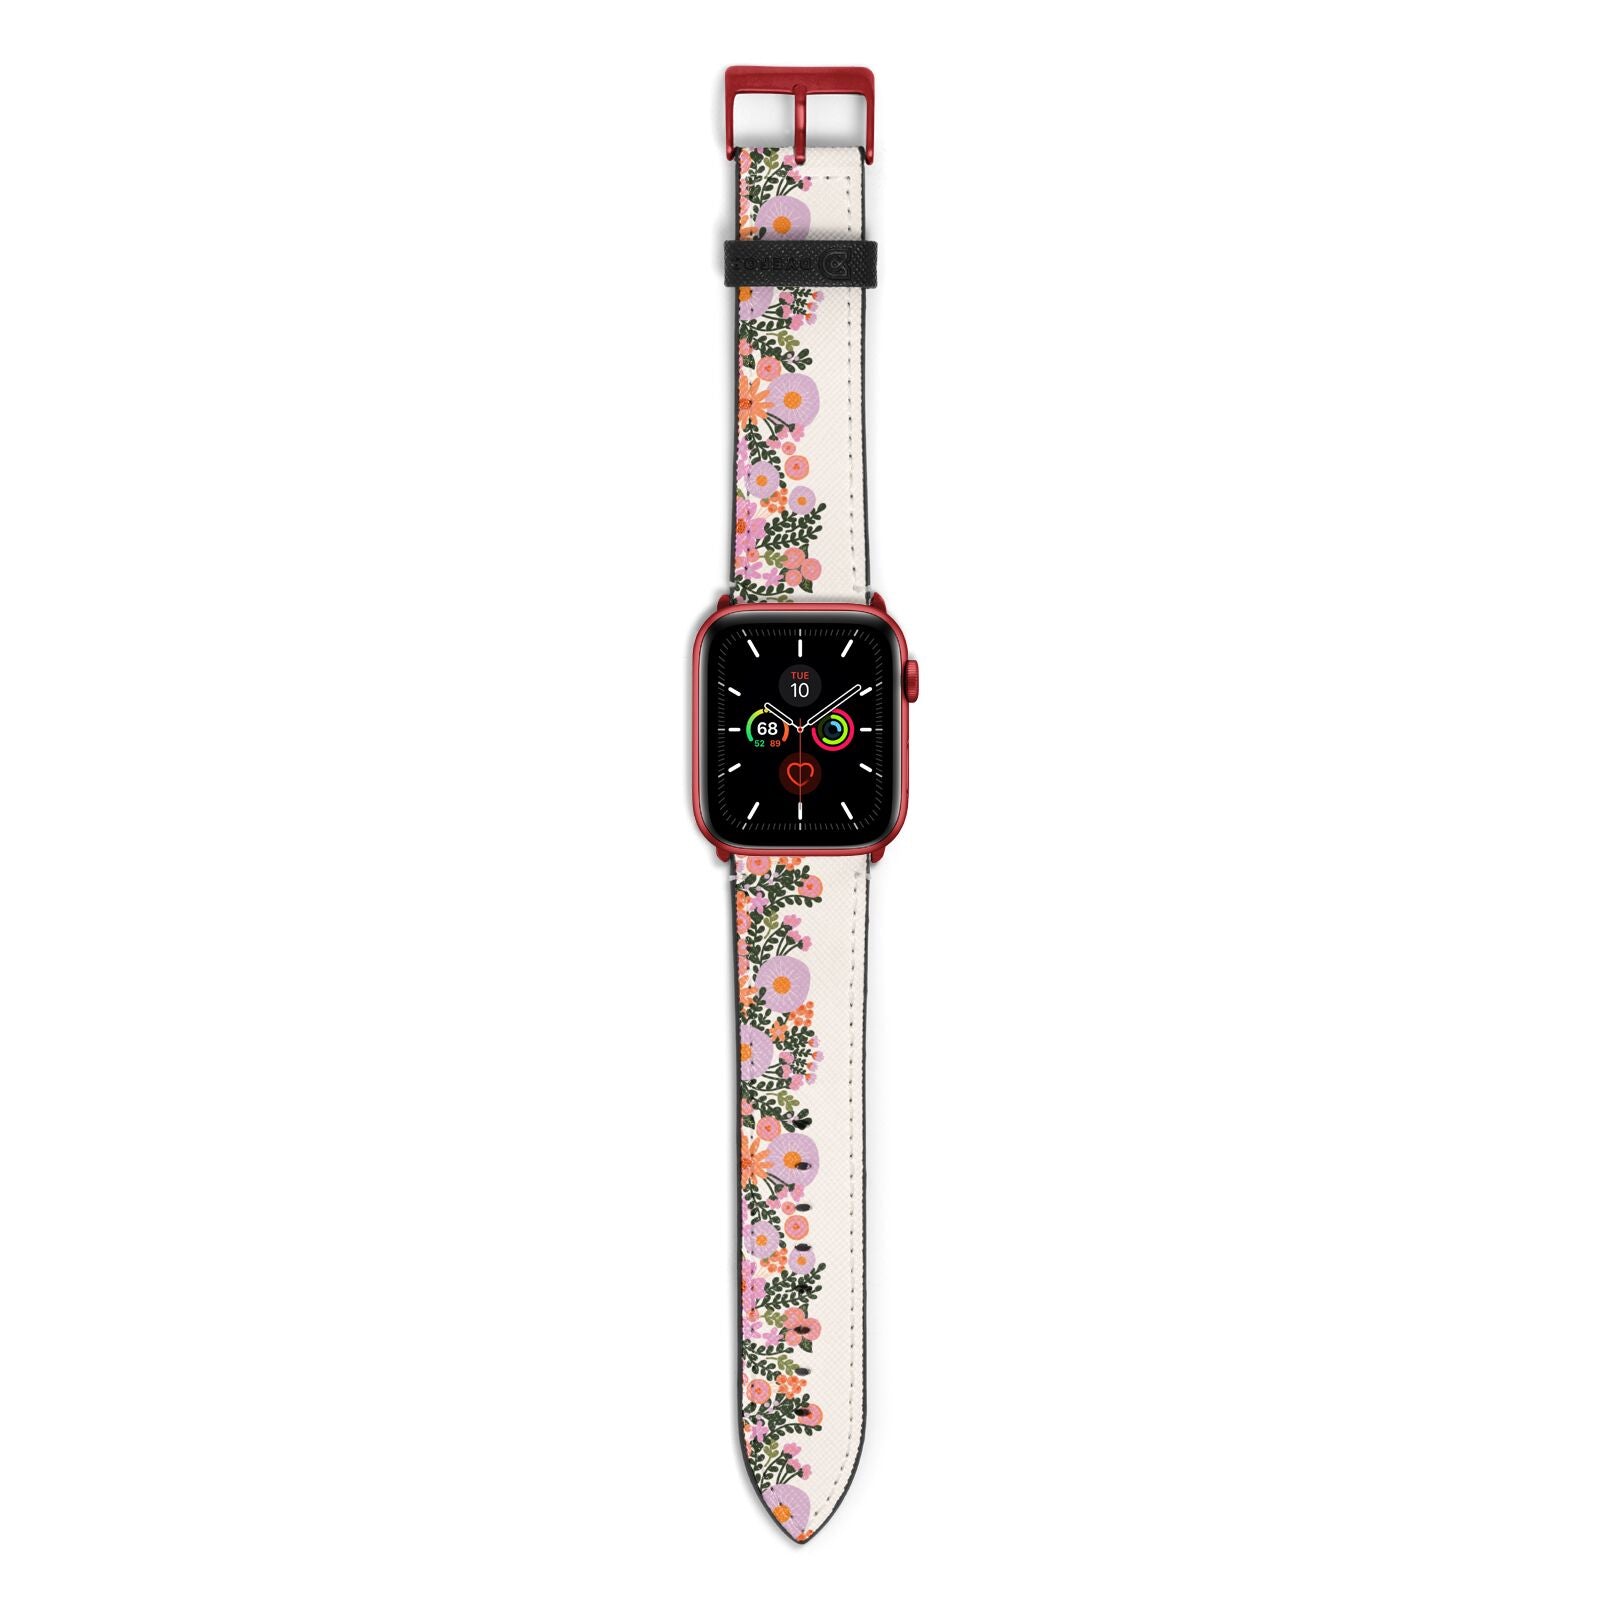 Floral Banner Pattern Apple Watch Strap with Red Hardware